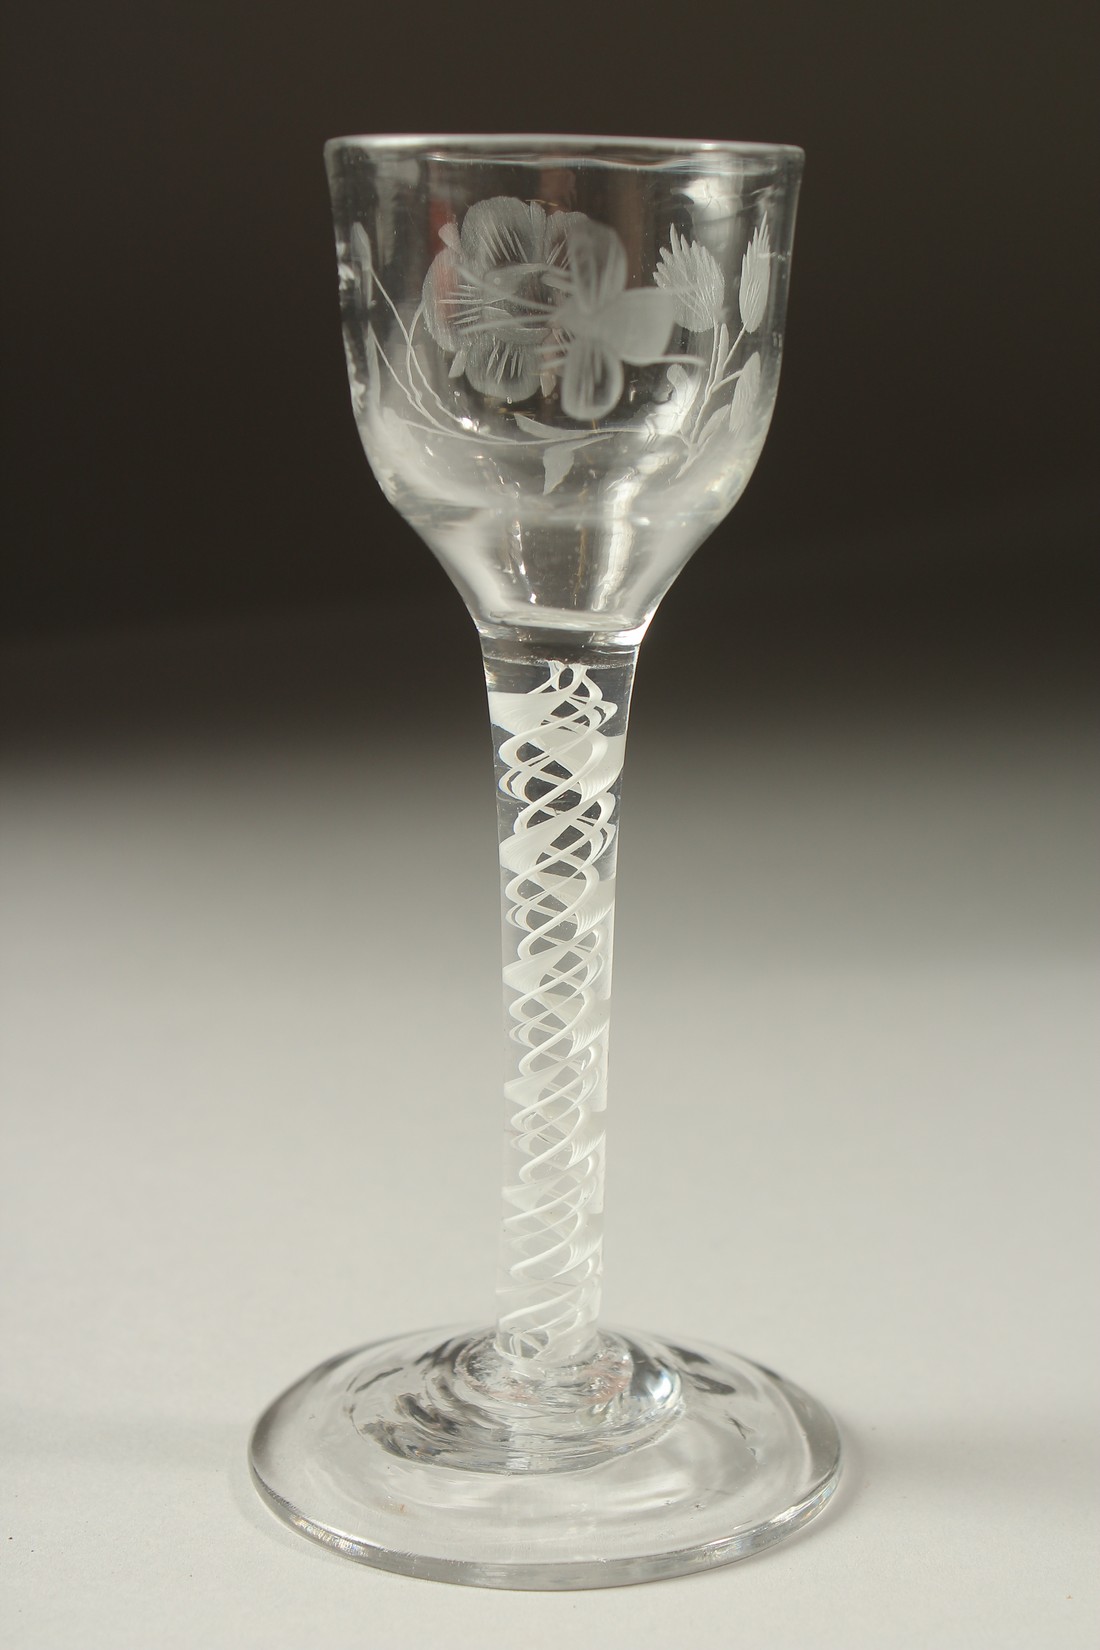 A GEORGIAN WINE GLASS, the bowl engraved with roses and opaque twist stem. 5.75ins high. - Image 3 of 5